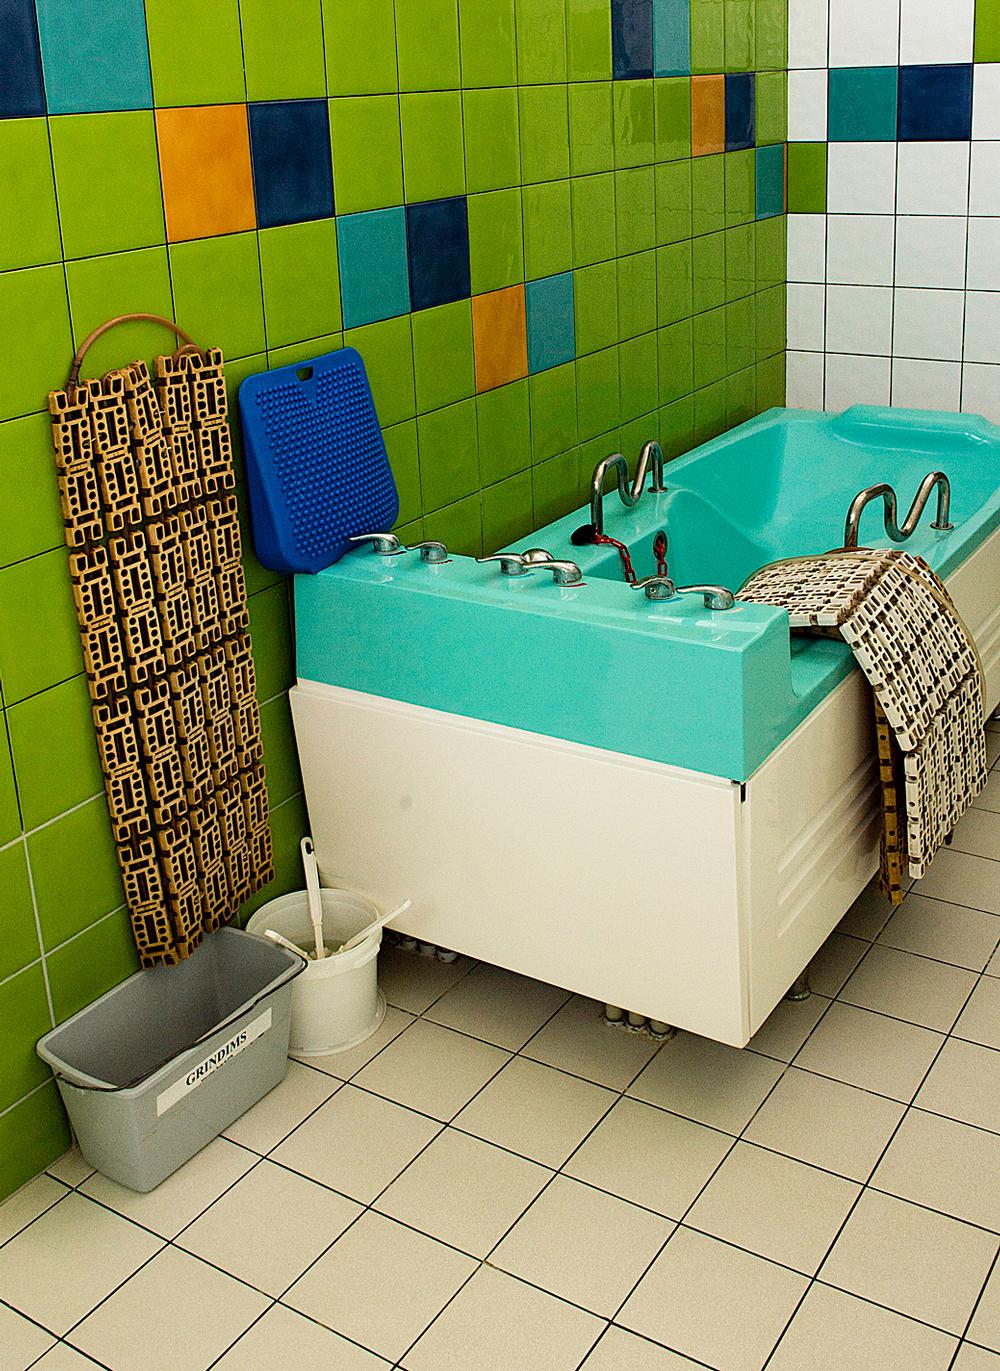 A mineral water bath cubicle at a health resort in the spa town of Druskininkai, Lithuania